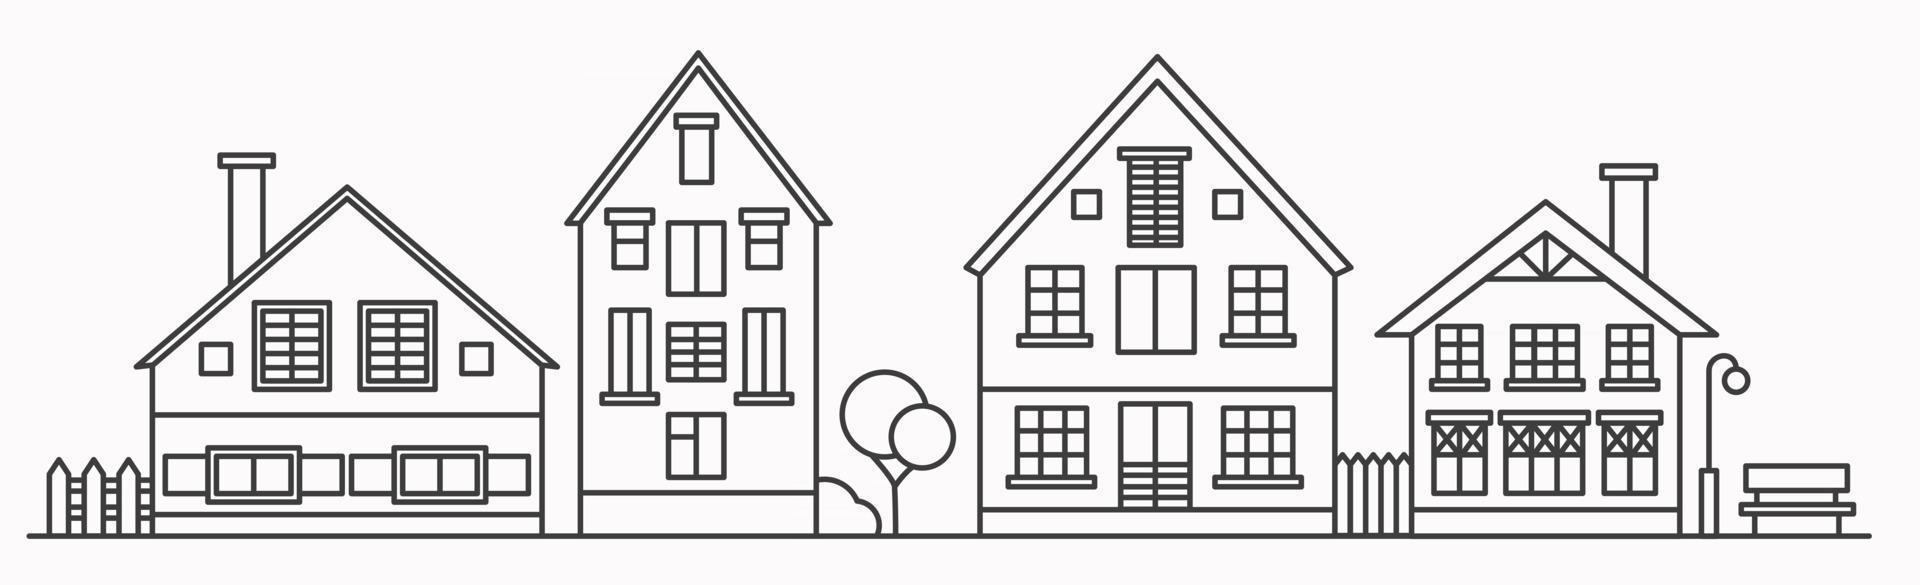 Linear cityscape with various row houses. Outline illustration. vector